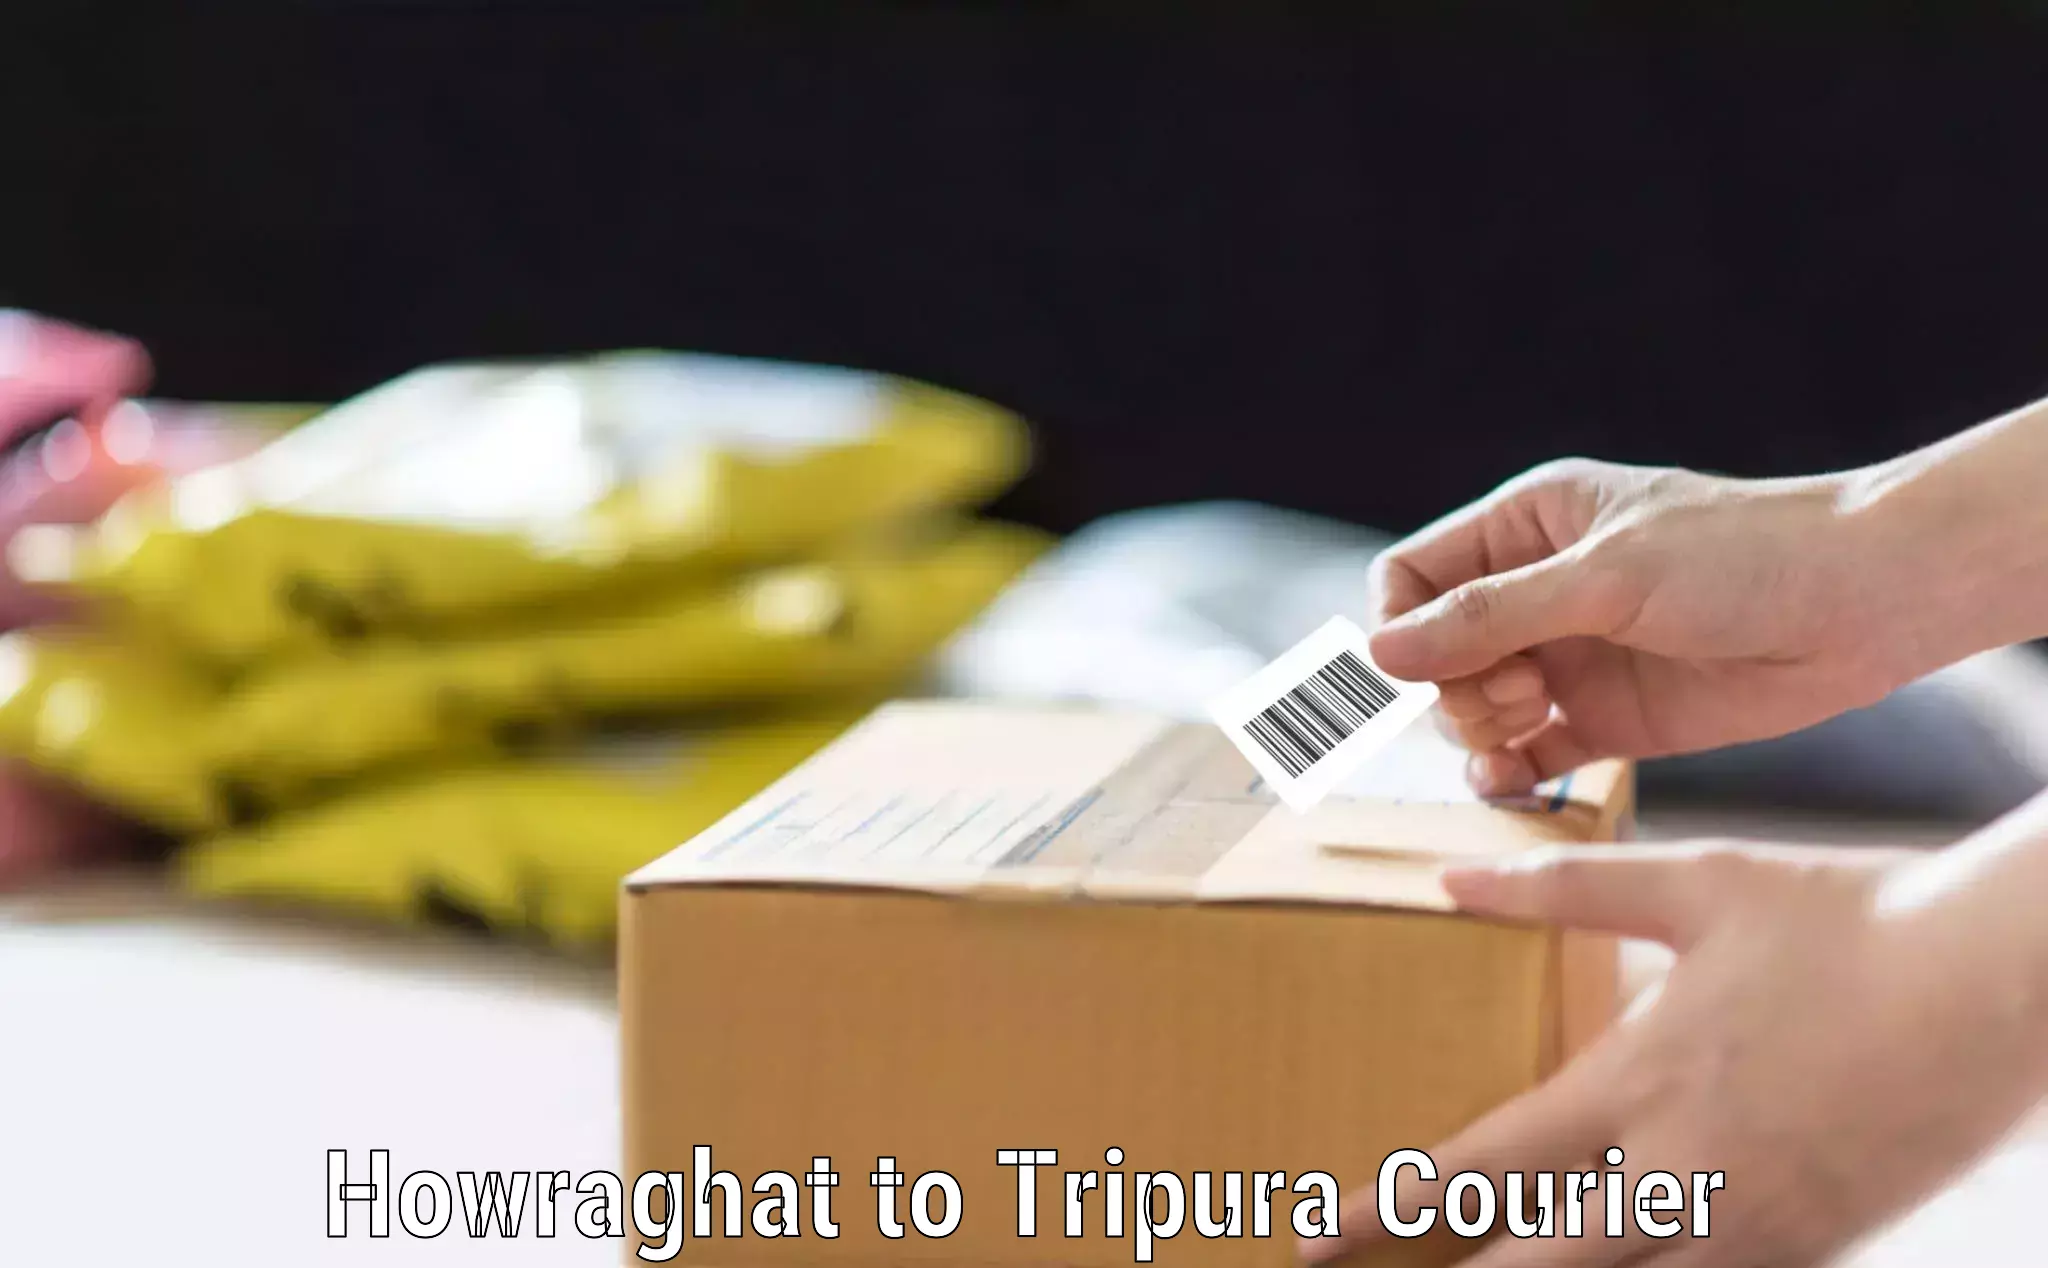 Baggage delivery scheduling Howraghat to Tripura